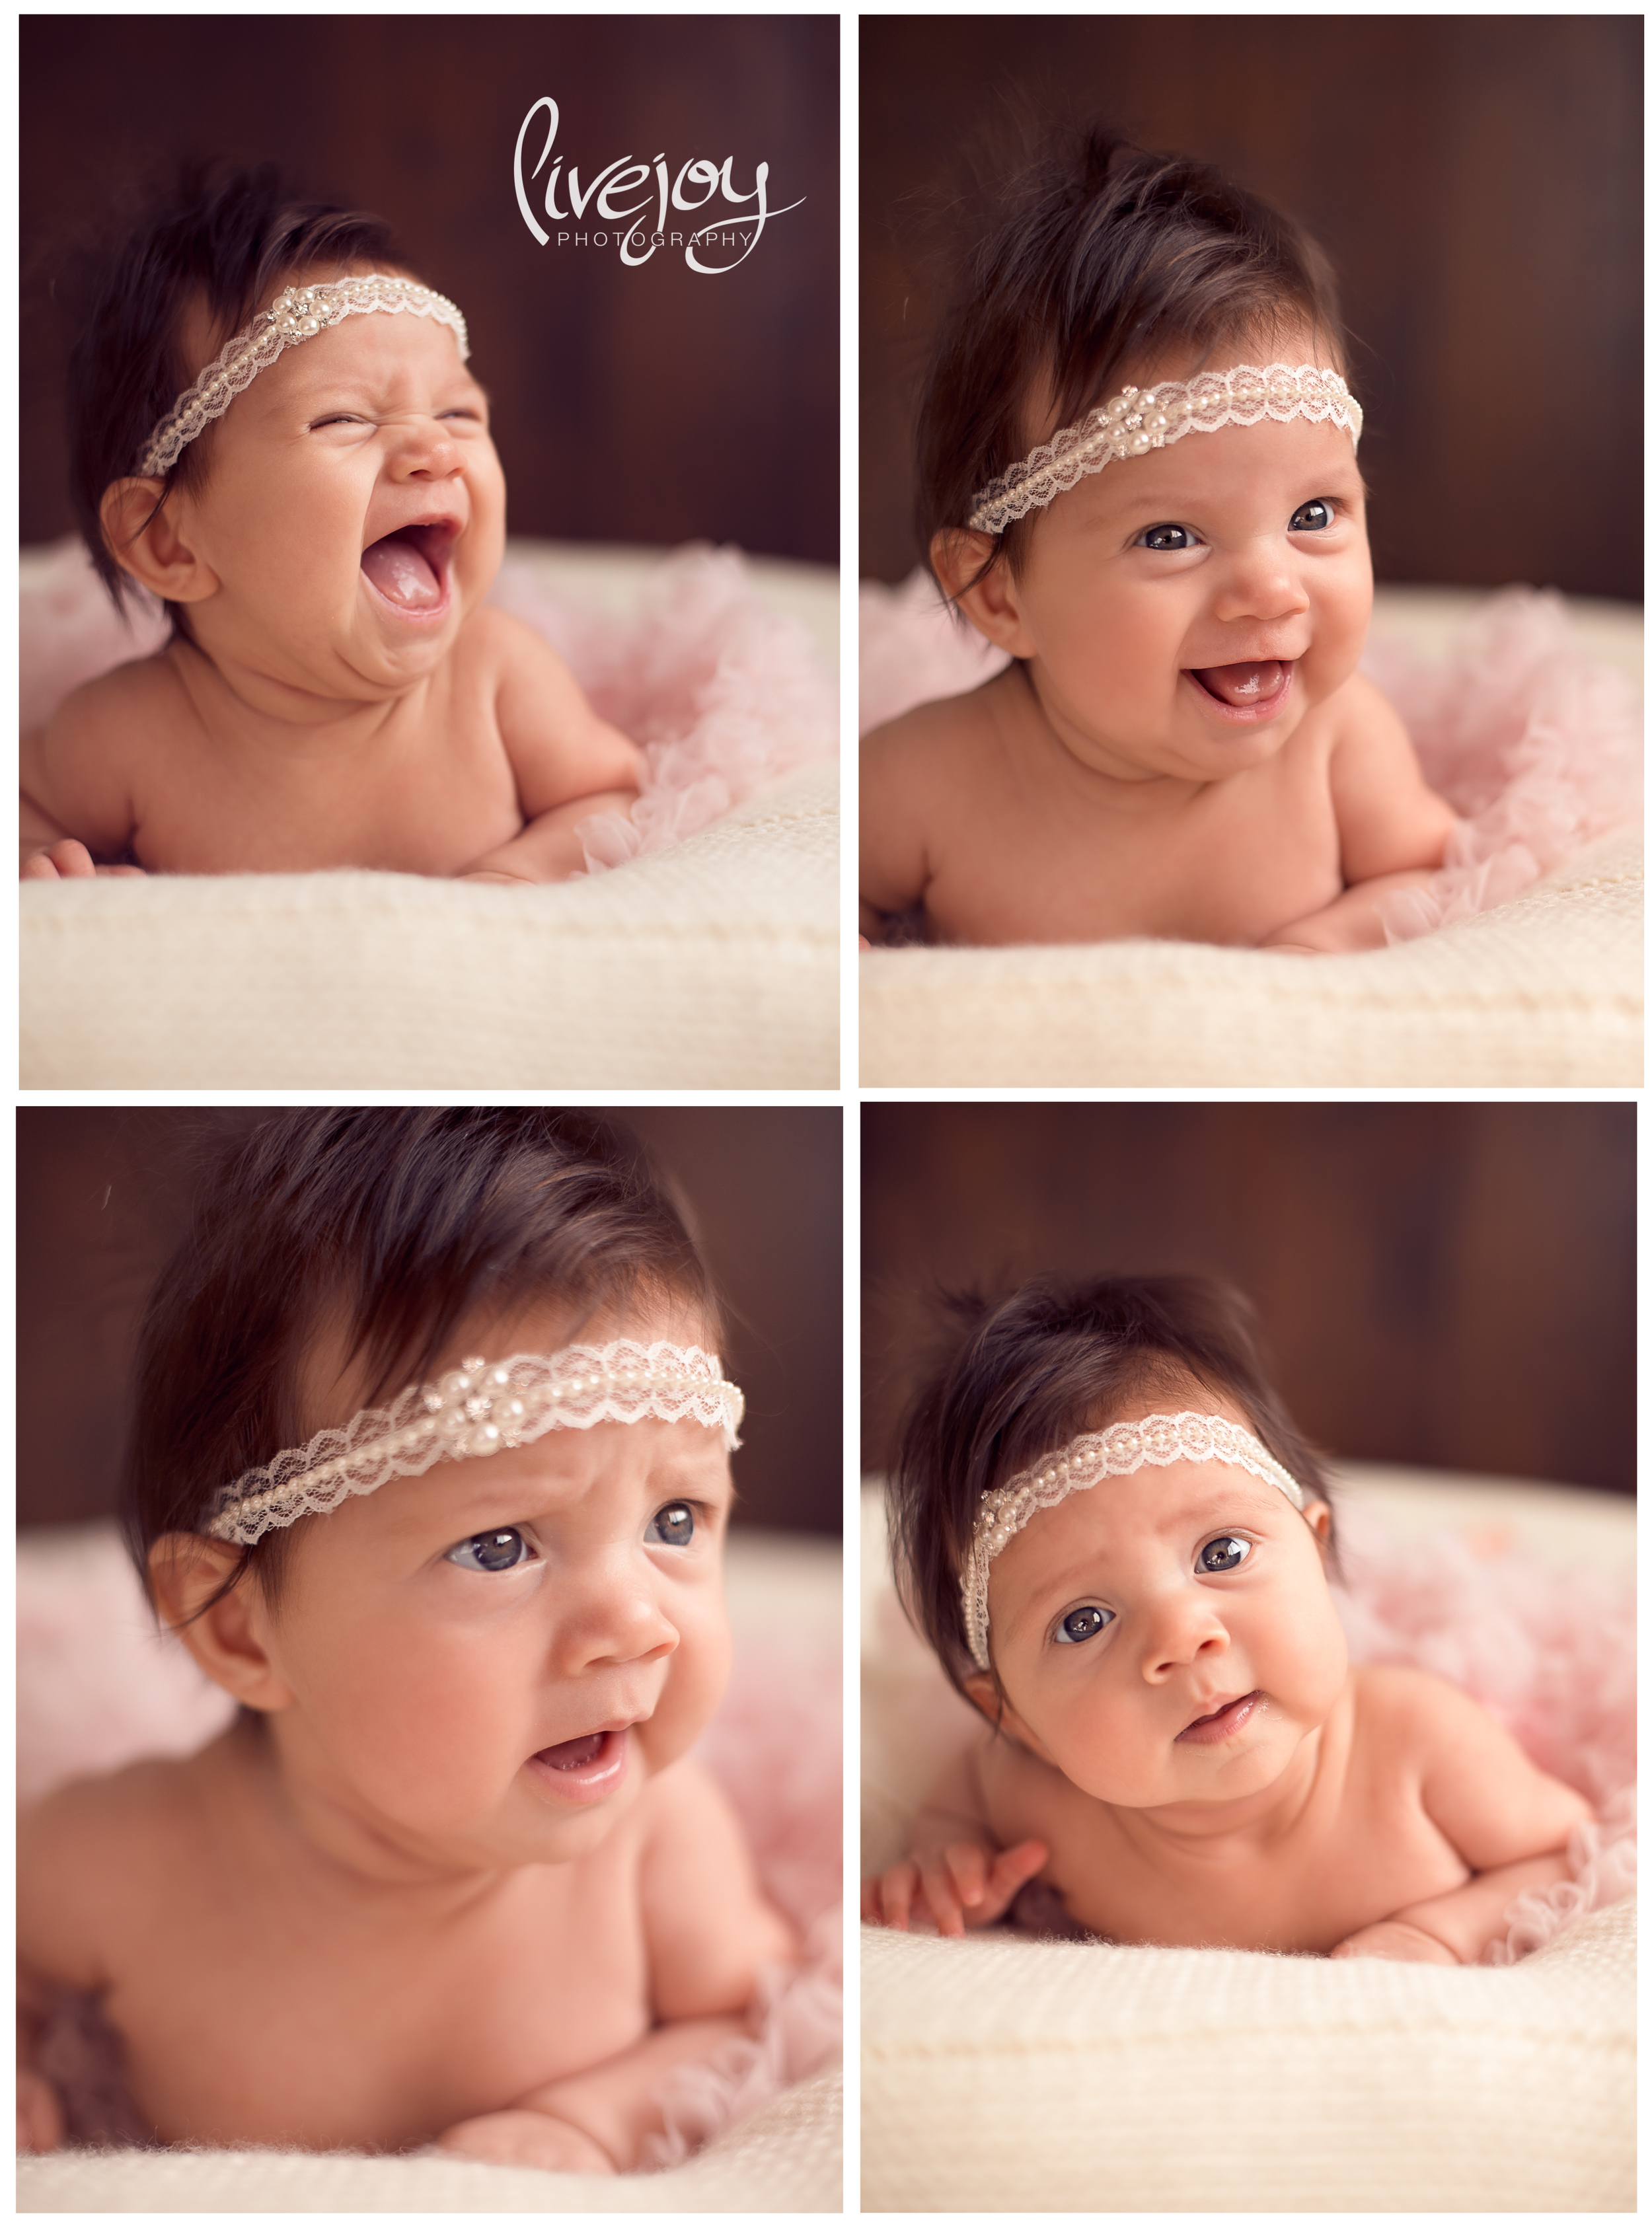 The many hilarious faces of Leila :) 3 Month Baby Photos | LiveJoy Photography | Oregon